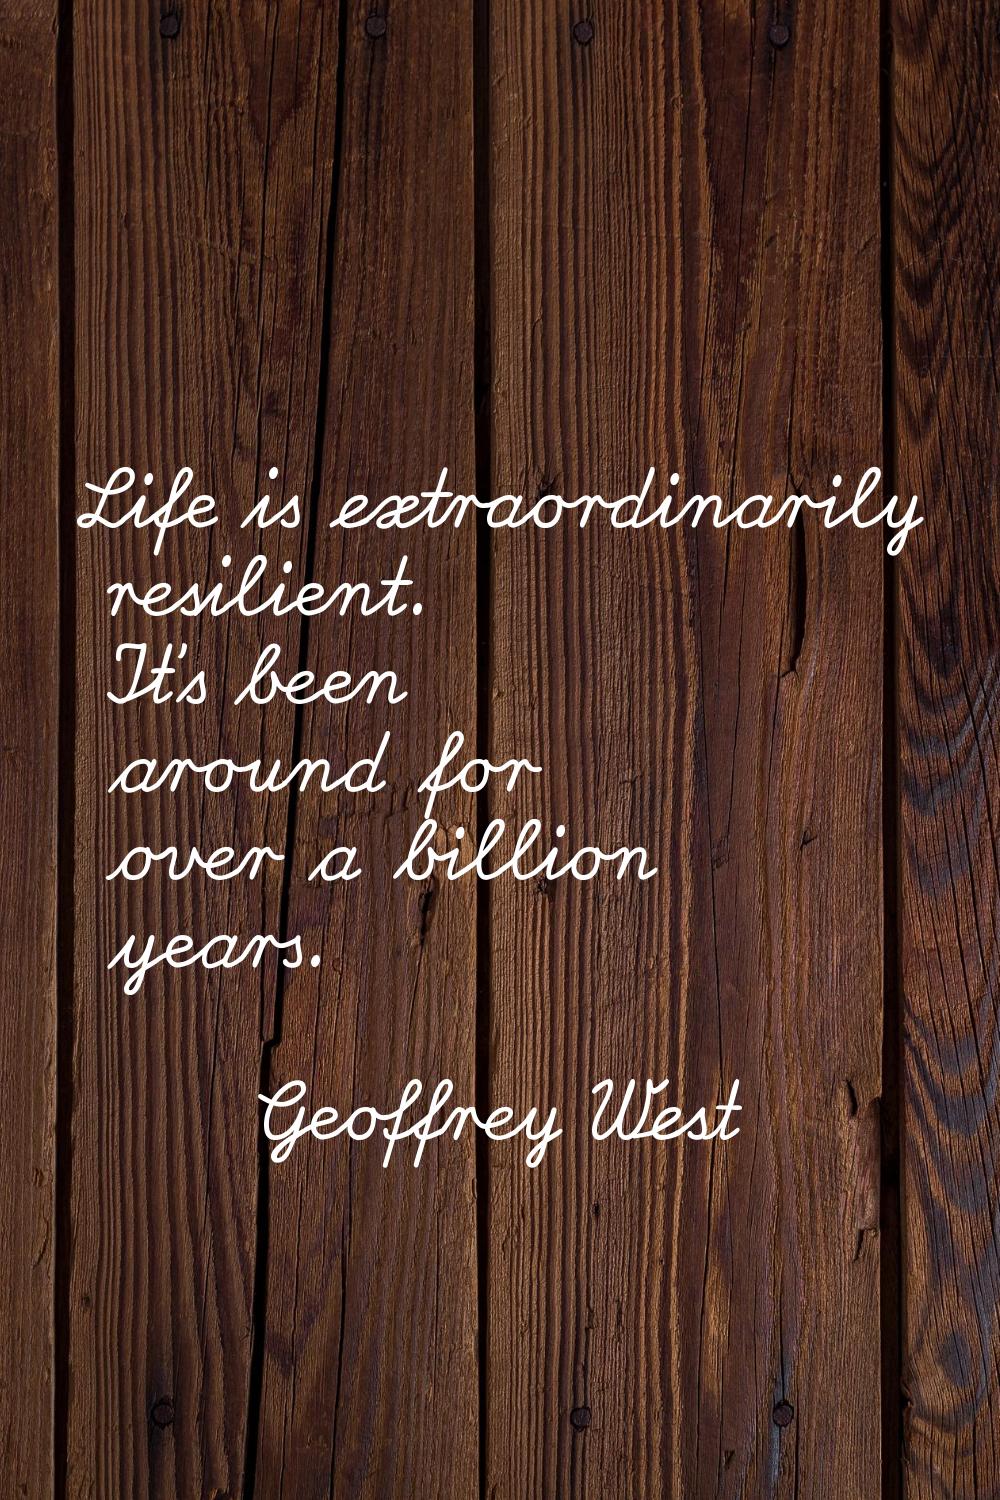 Life is extraordinarily resilient. It's been around for over a billion years.